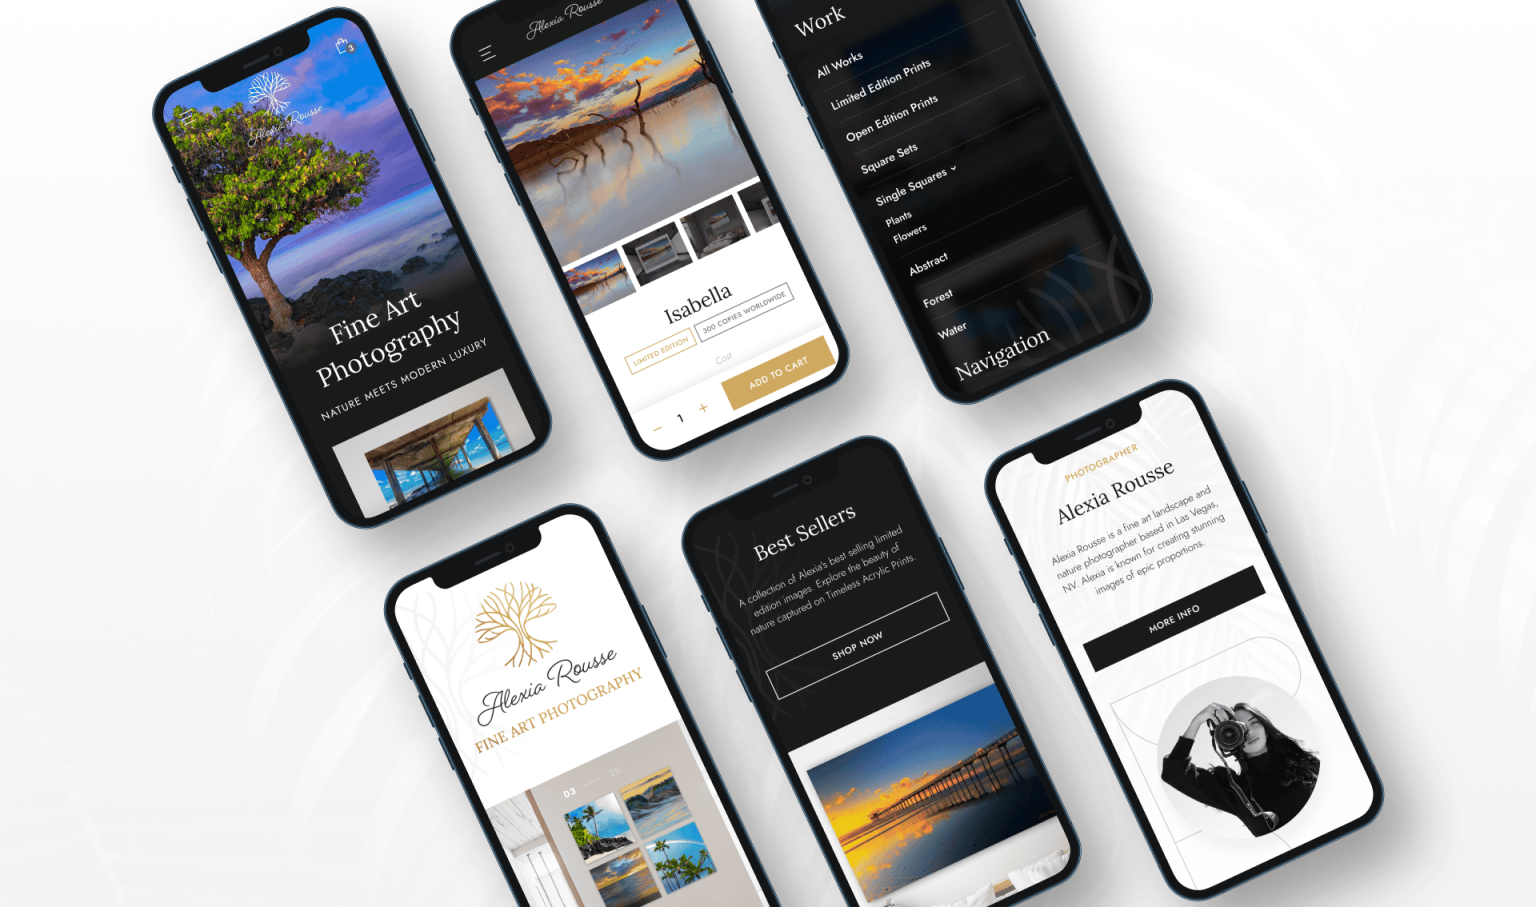 Alexia Rousse Photography website design mockup on iphones